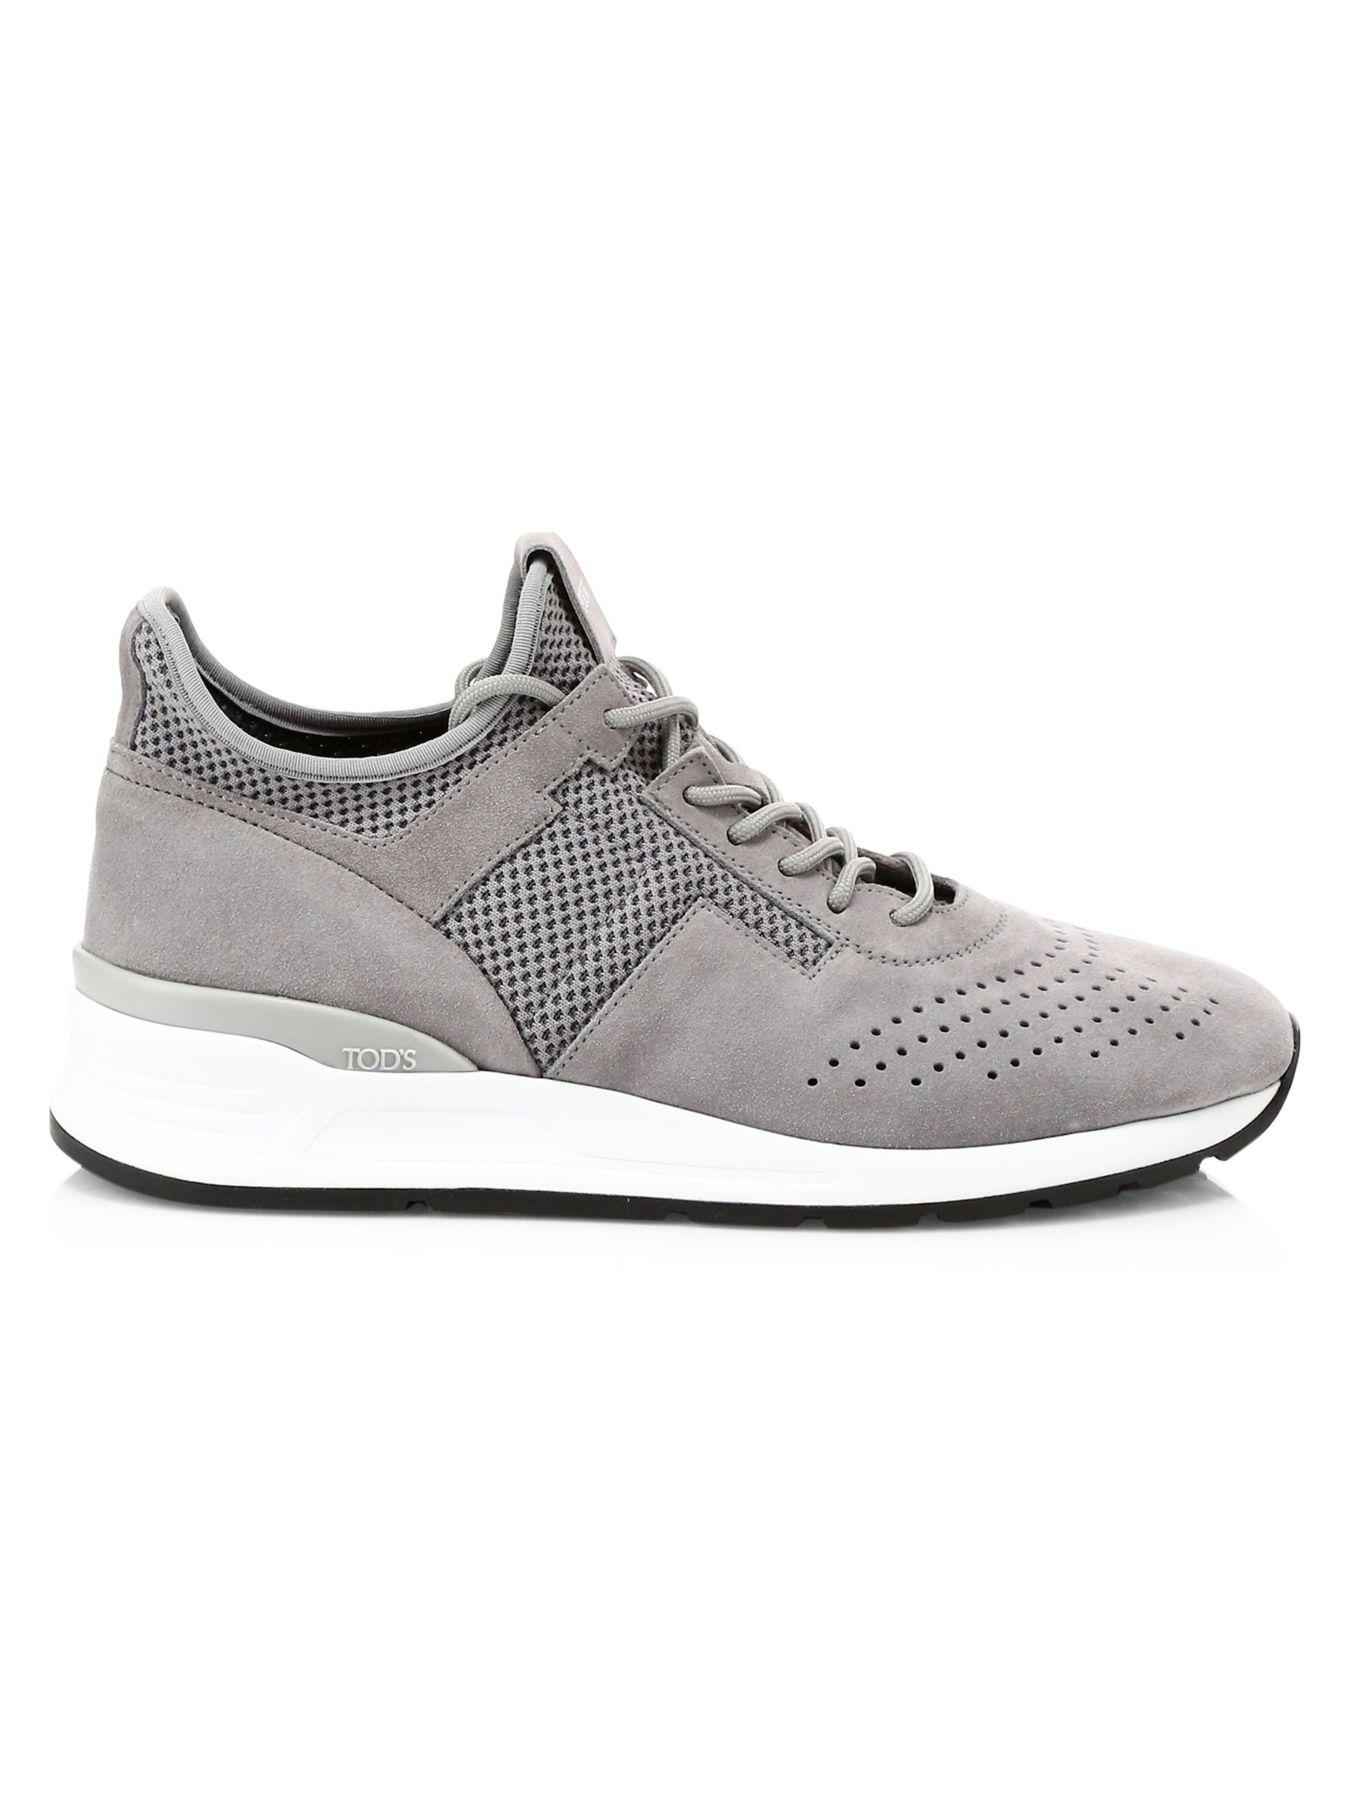 Tod's Suede & Mesh Lace-up Sneakers in Grey (Gray) for Men - Lyst